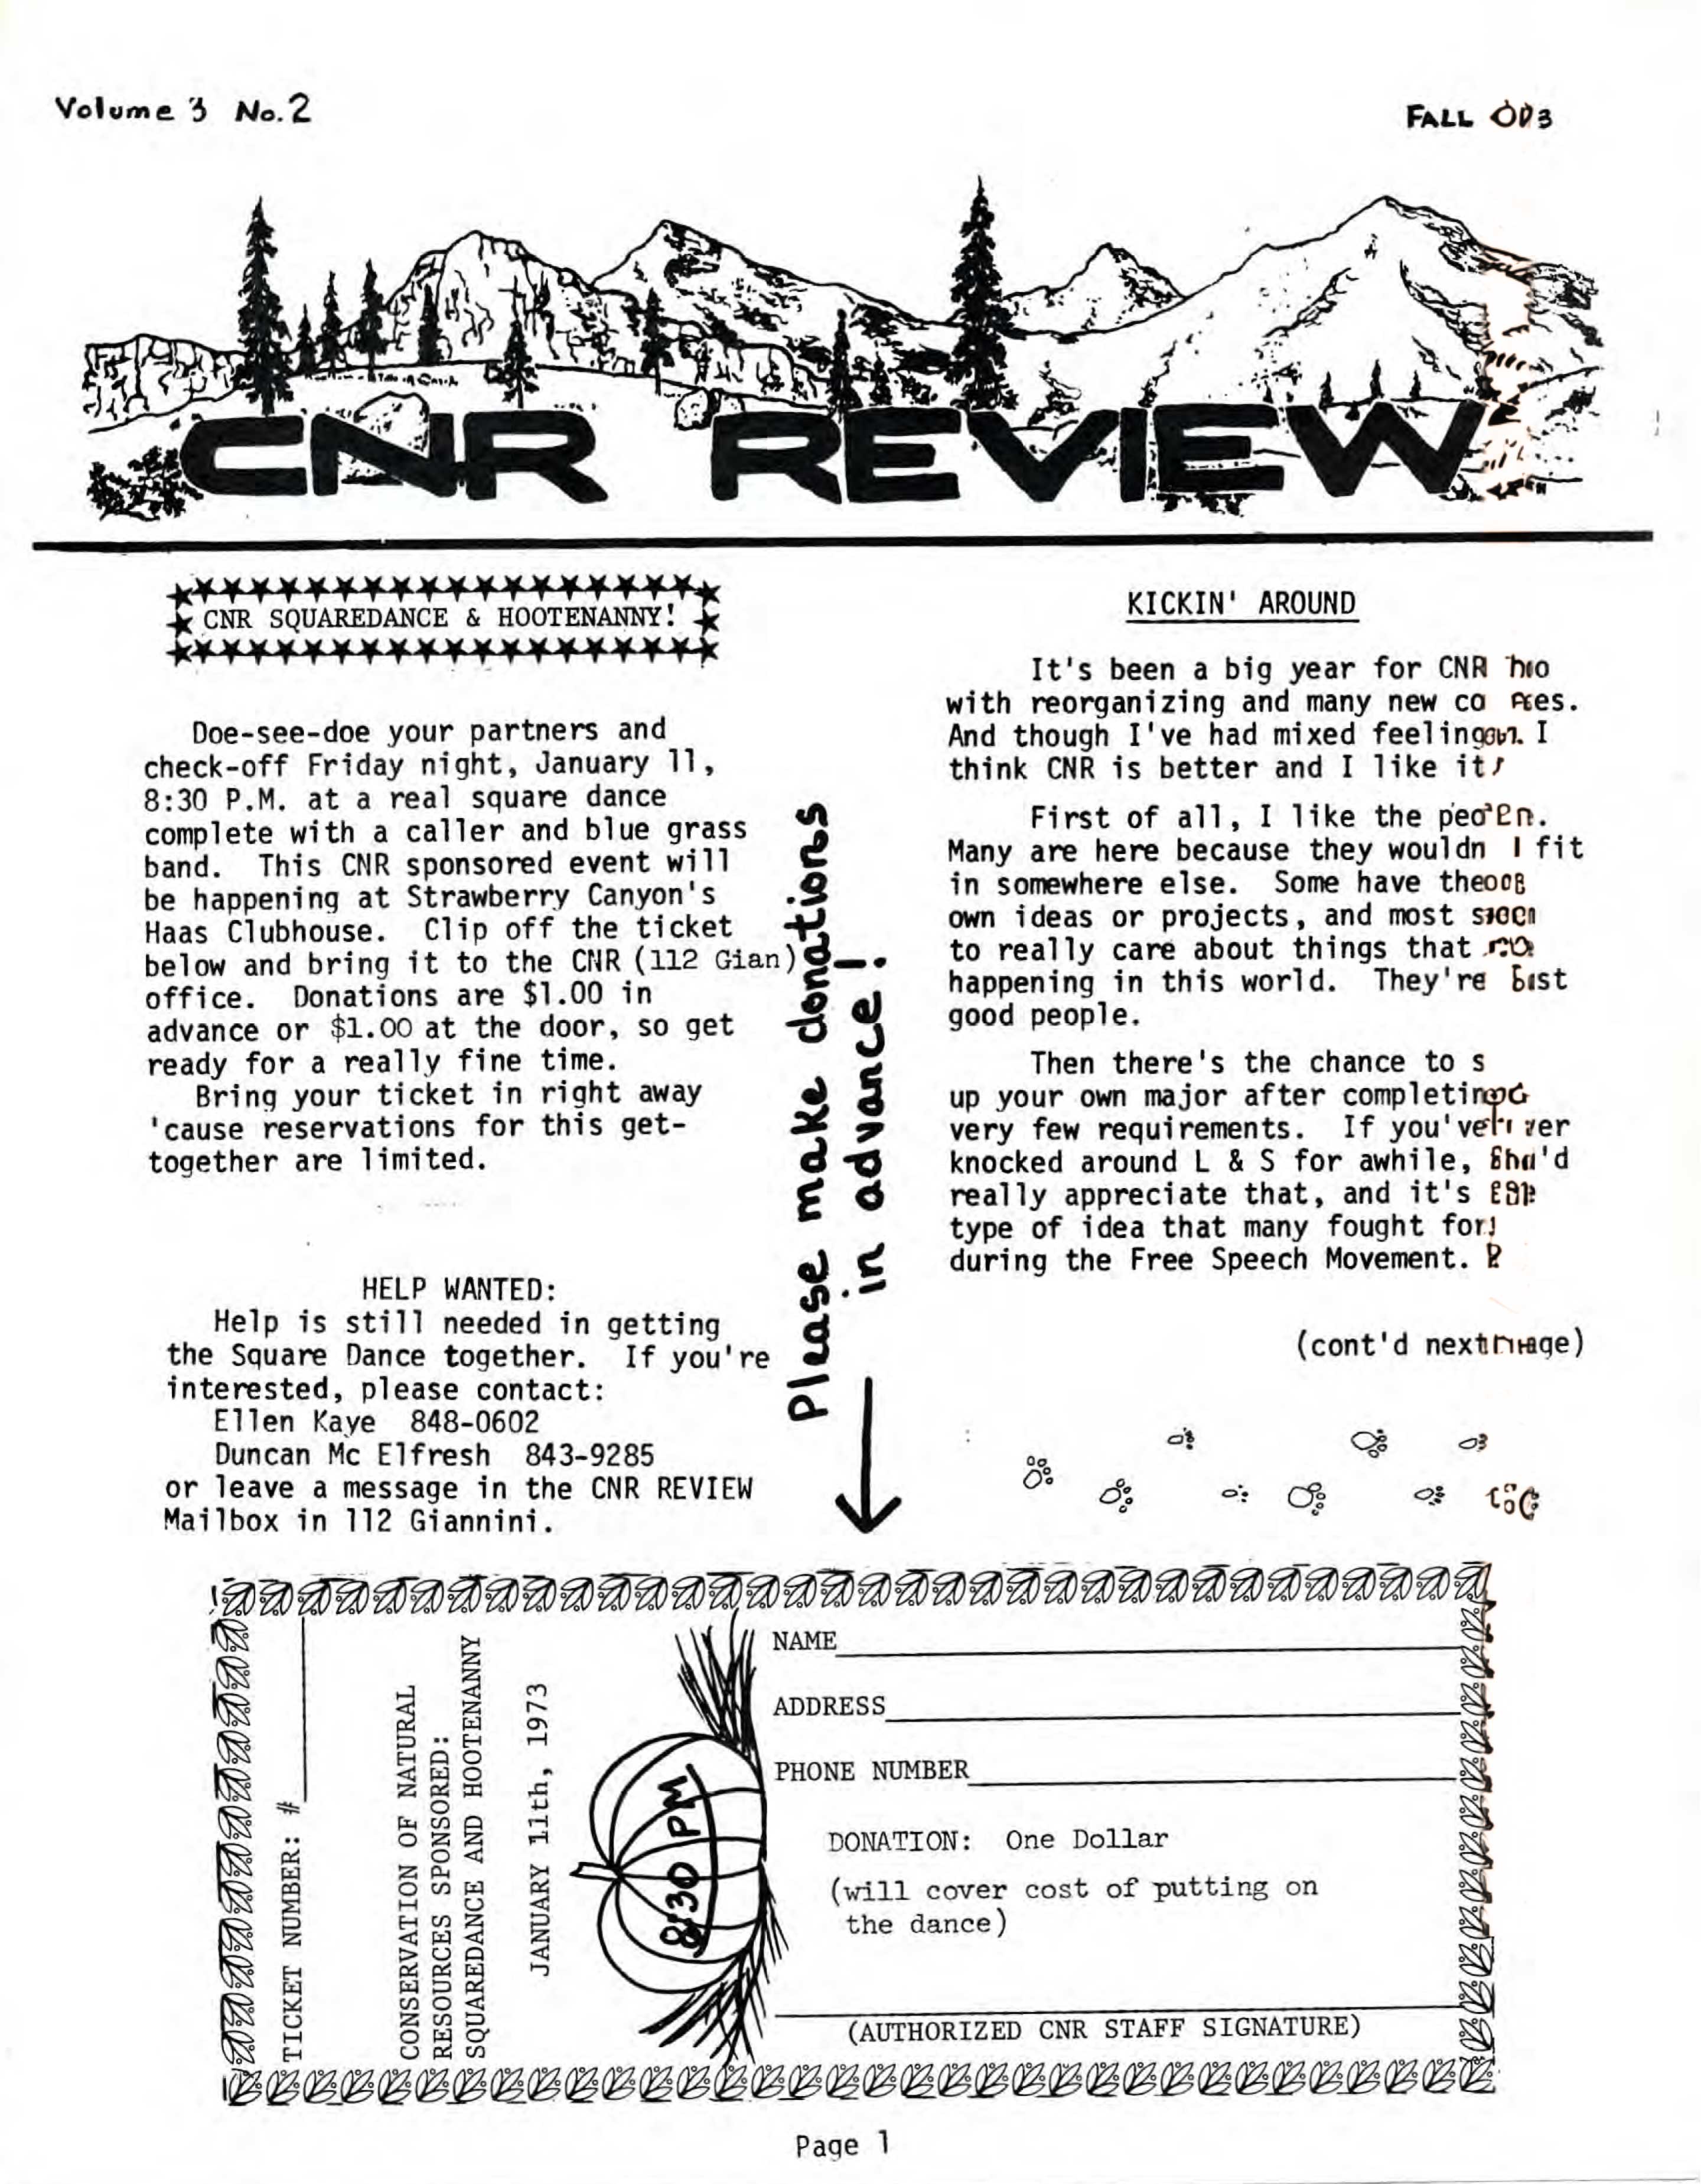 A page from the 1973 CNR Review publication